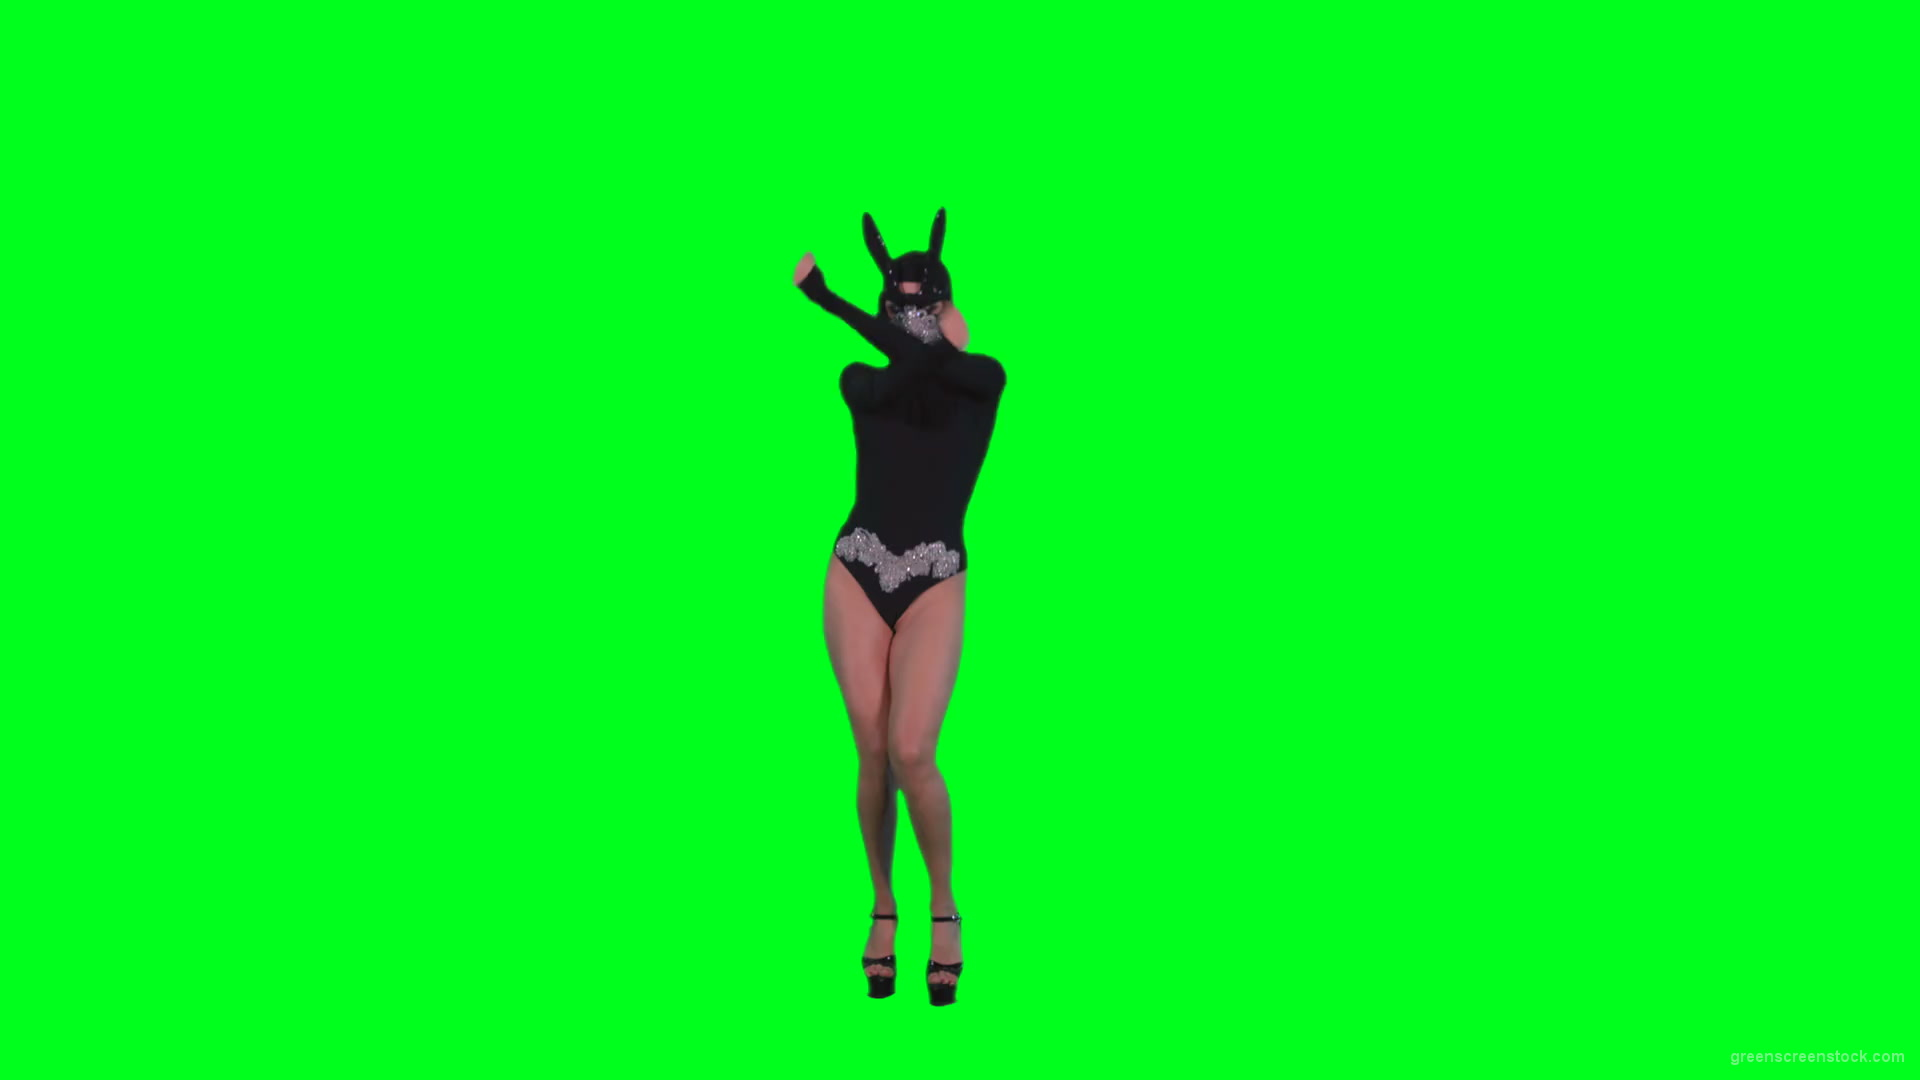 Black-Occult-Banny-Rabbit-dancing-girl-jumping-isolated-on-green-screen-4K-Video-Footage-1920_001 Green Screen Stock